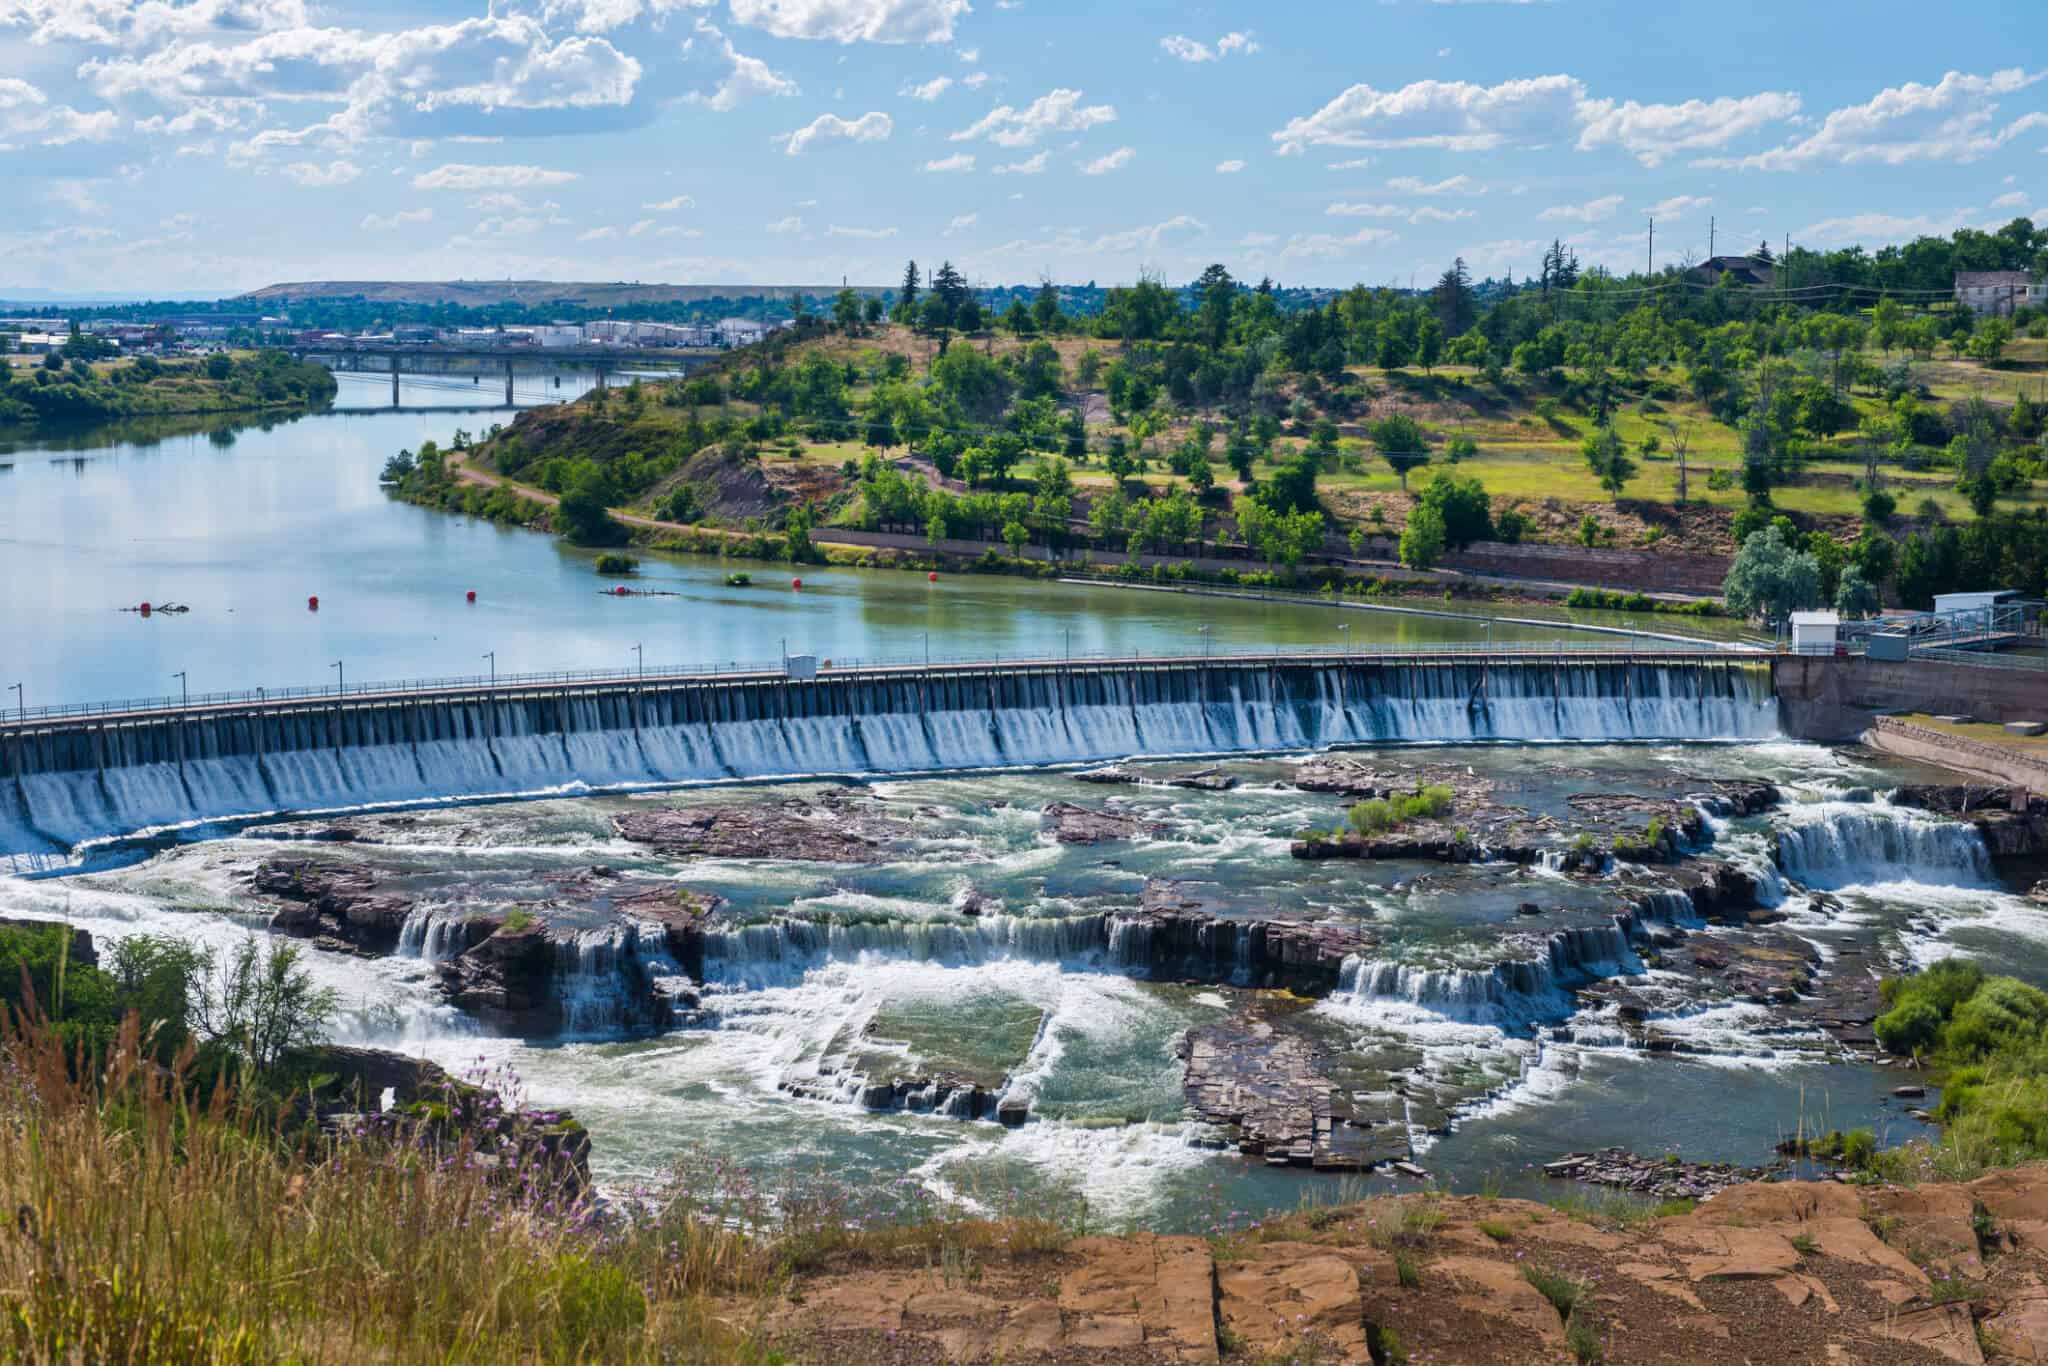 One of a series of 5 waterfalls that cascade over hydroelectric dams along the upper Missouri River in Great Falls, Montana.